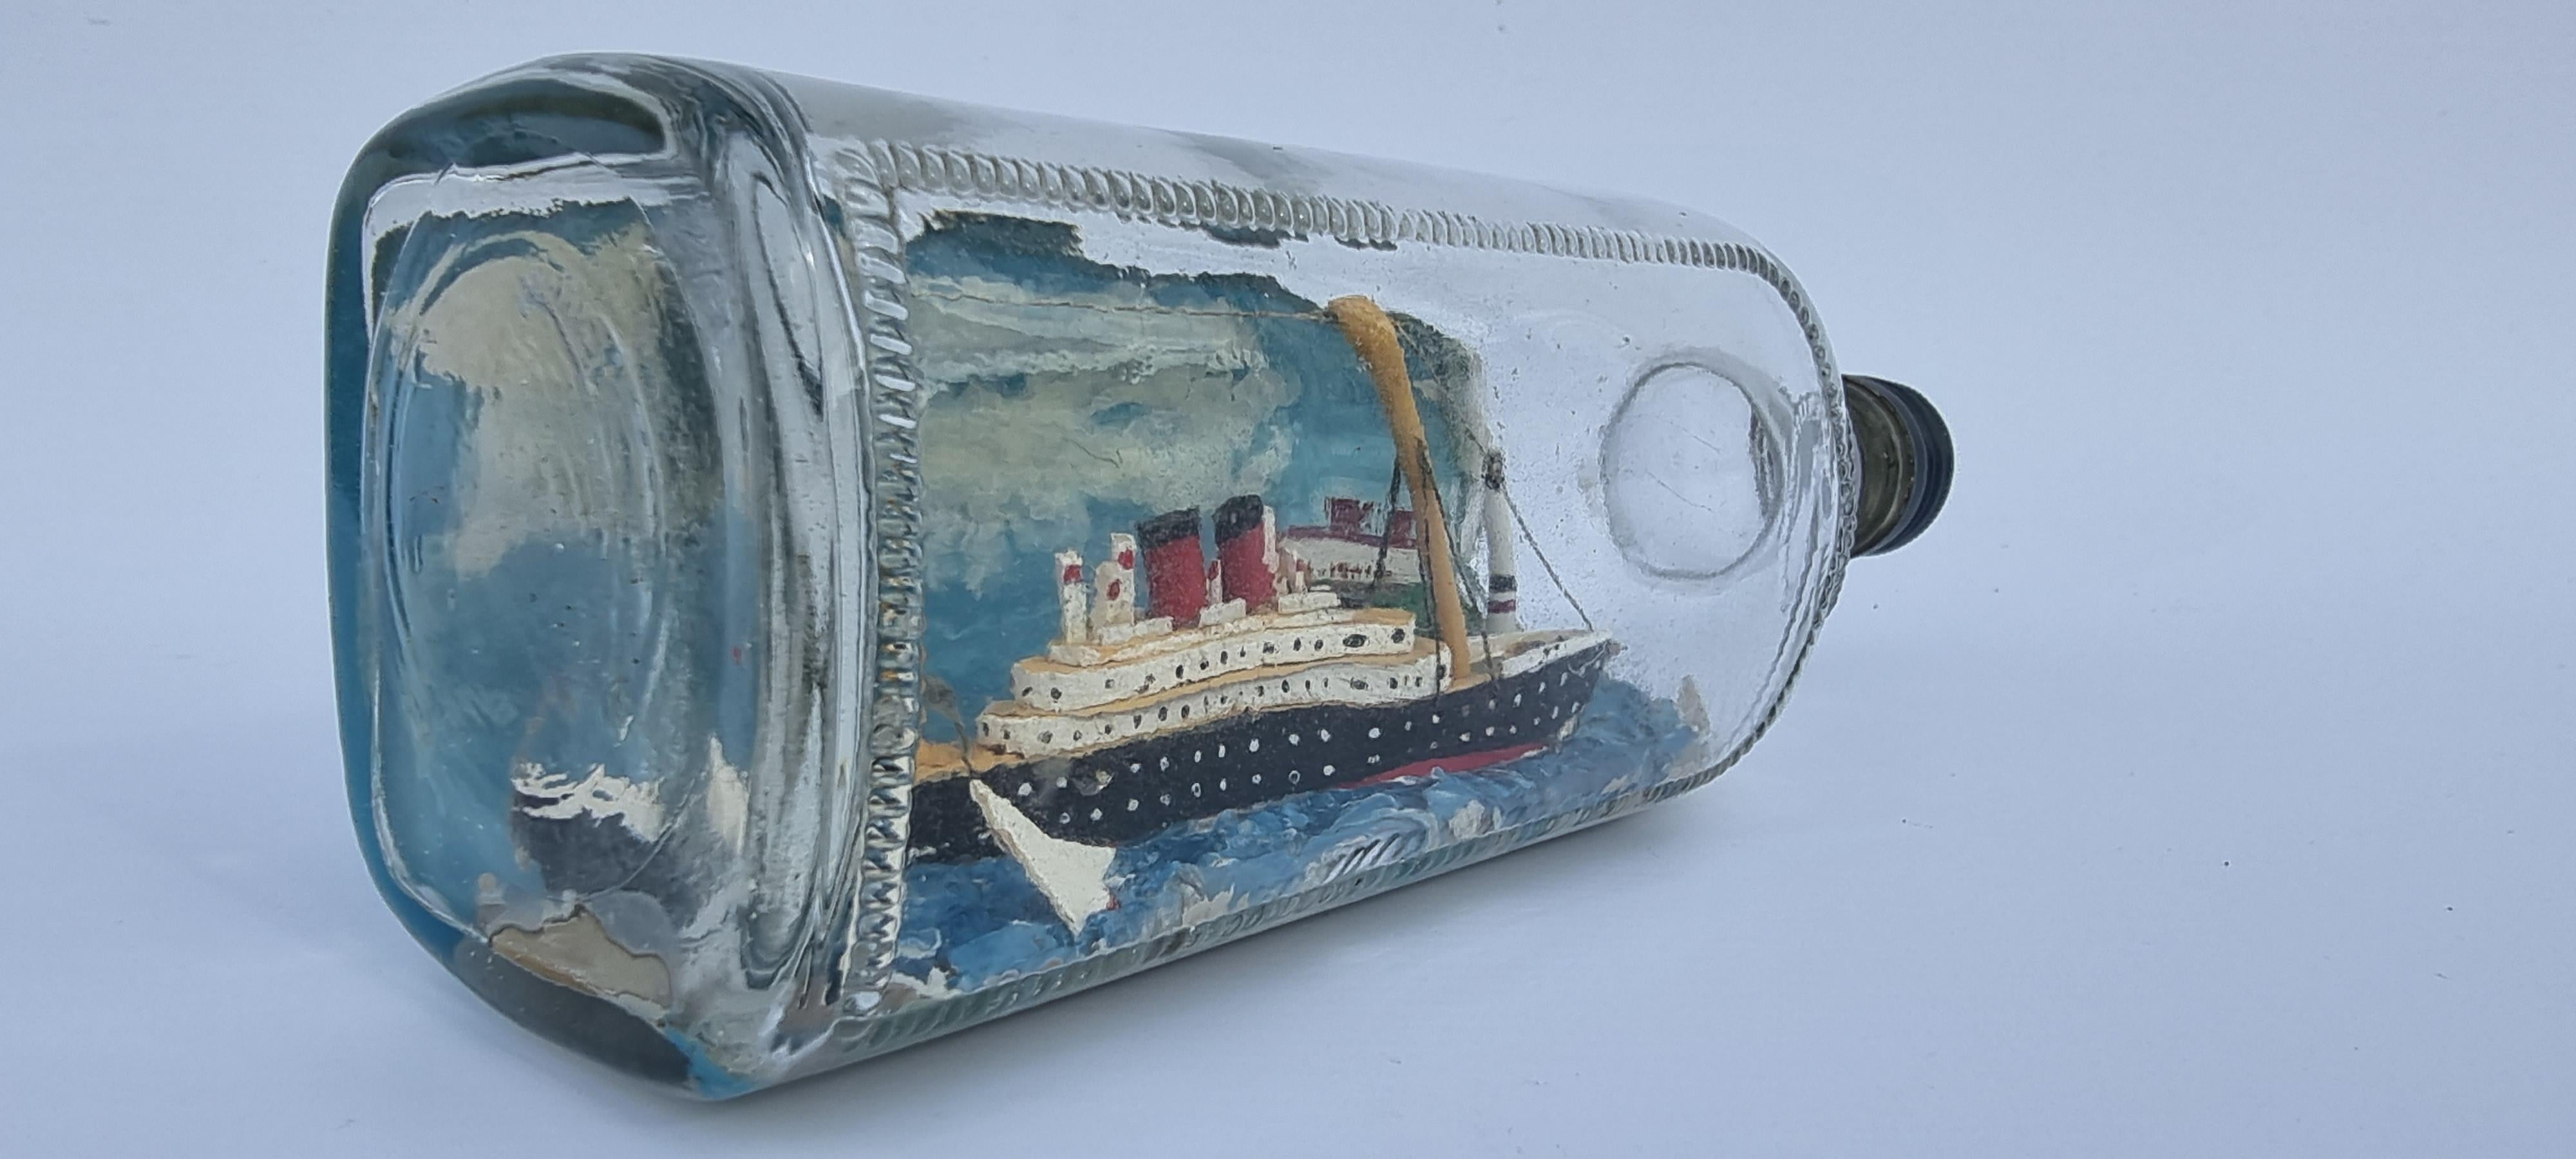 This early 20th century ship in a bottle diorama is of a rarer subject being an early large steam ocean going passenger liner set in a scene just off the shoreline with a lighthouse and cottages. The ship is on a choppy sea with two racing yachts in